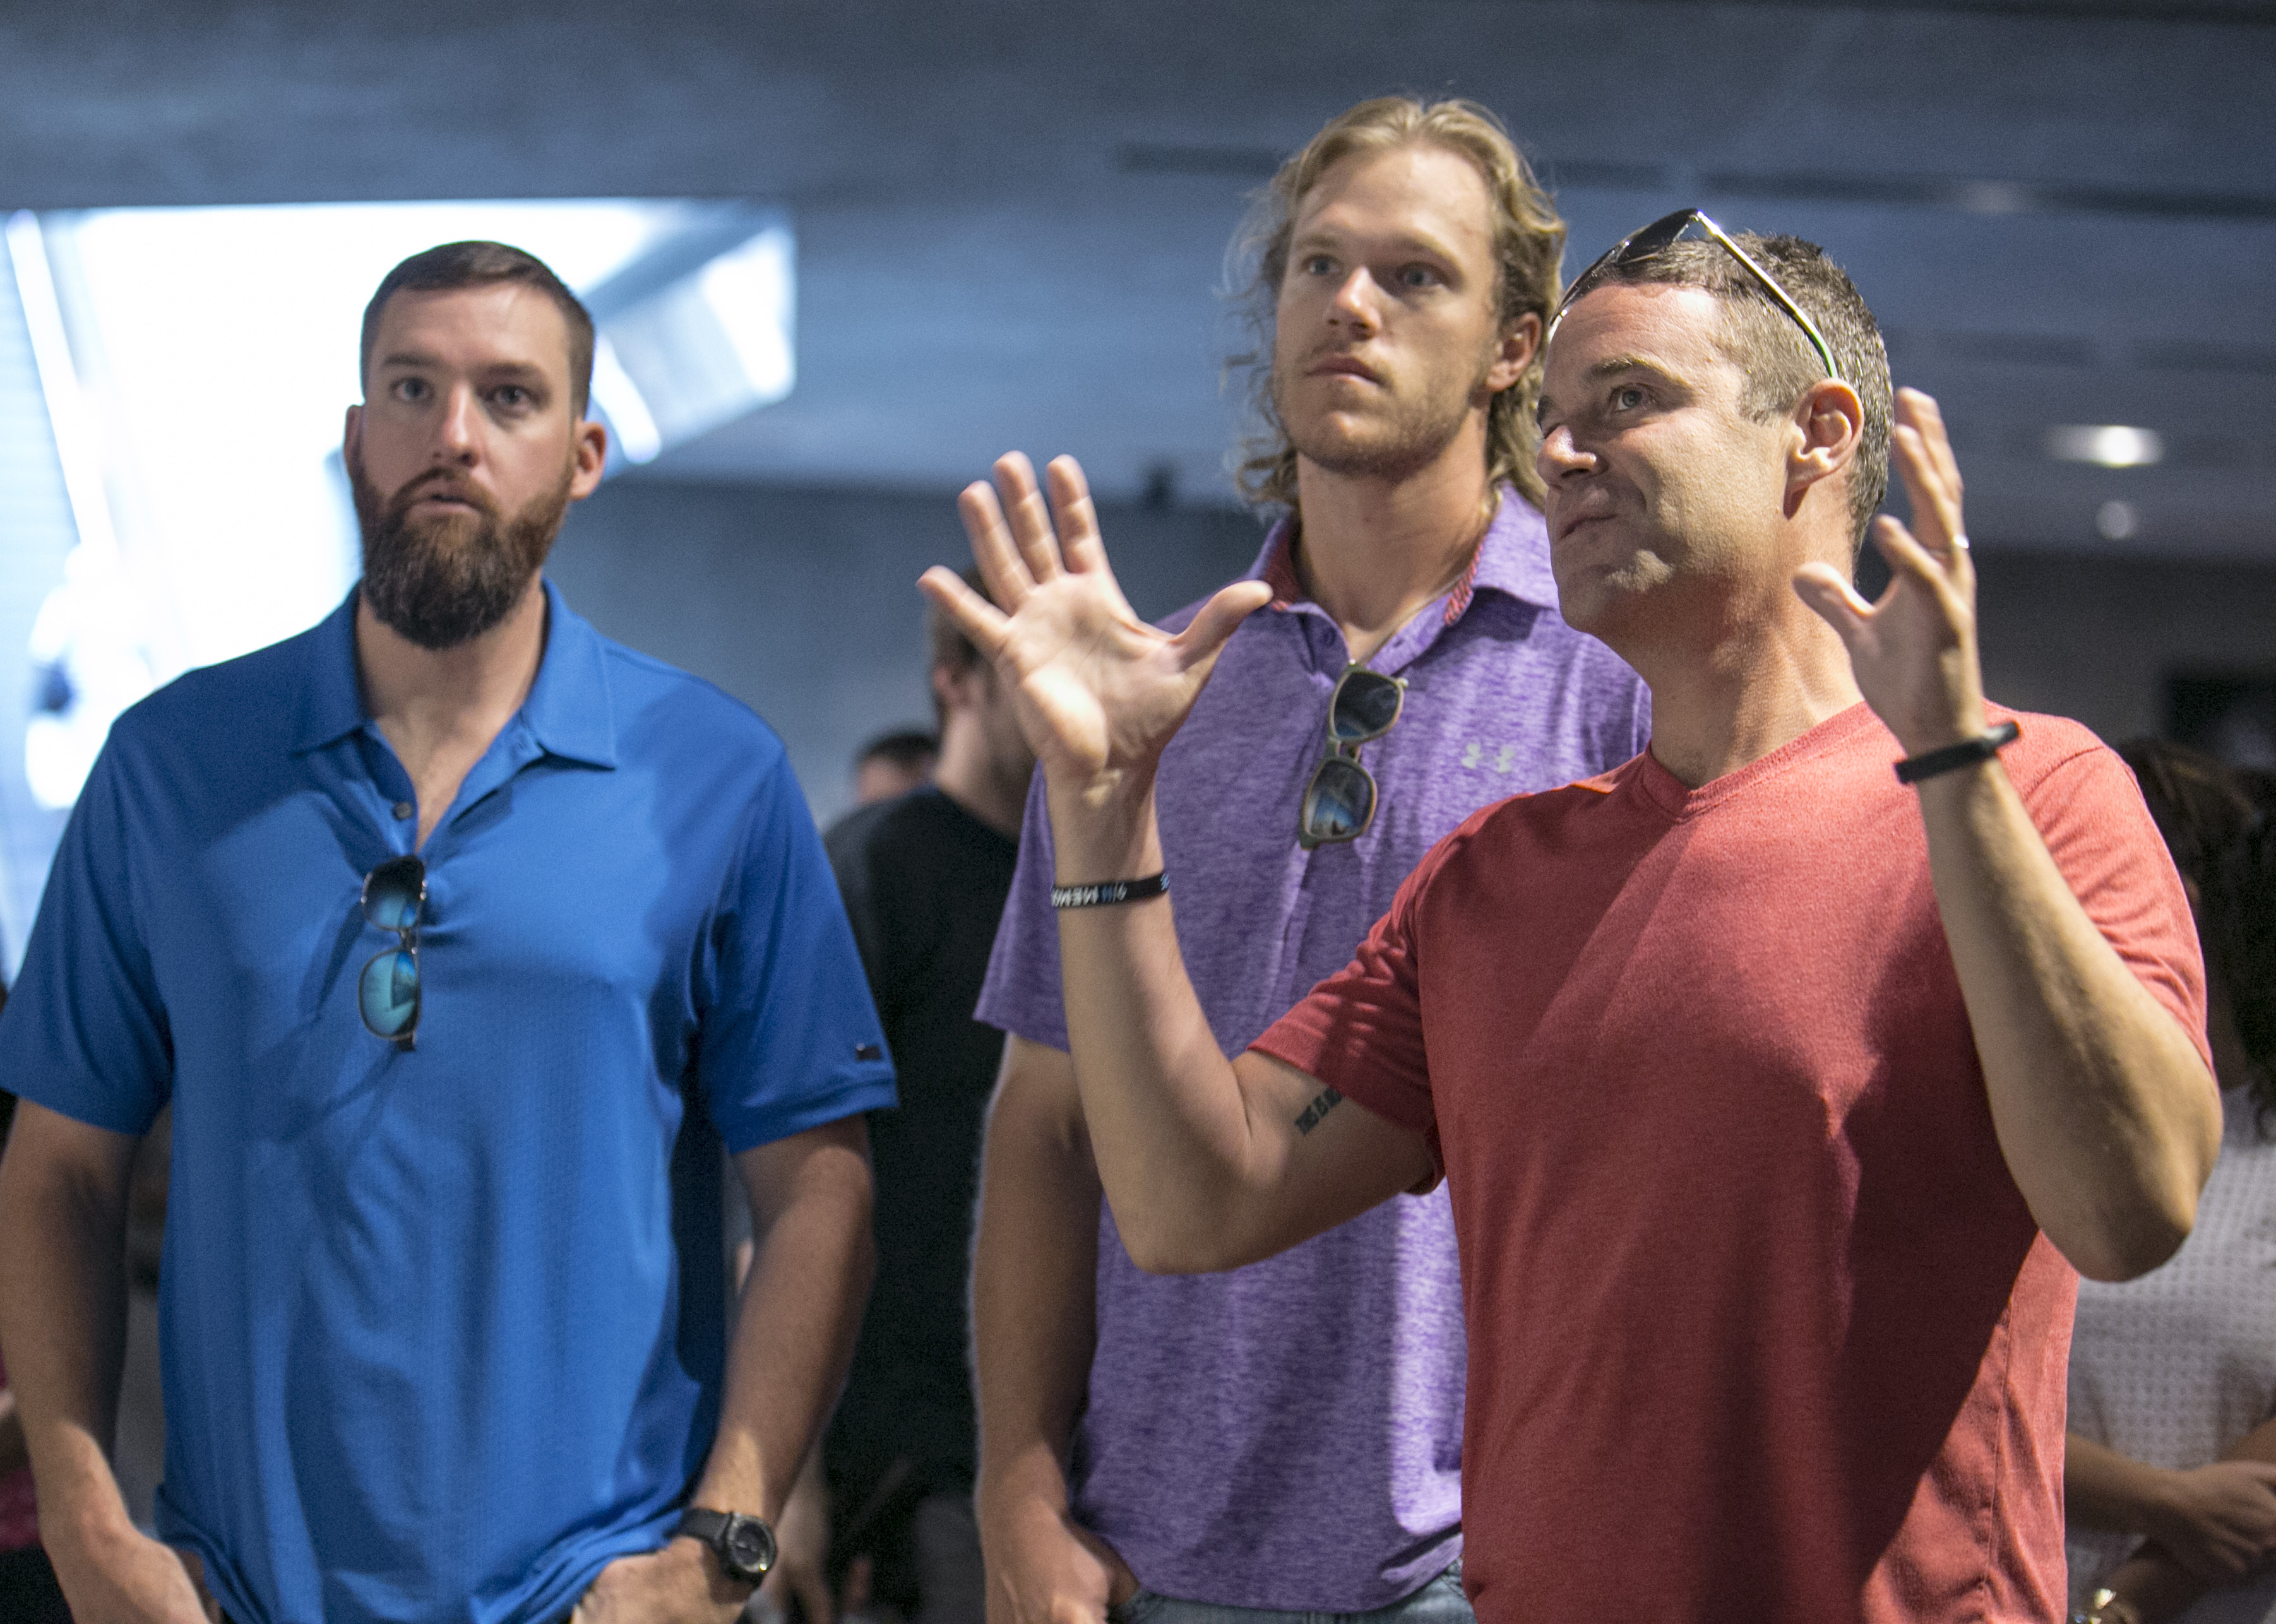 New York Mets pitchers Noah Syndergaard and Bobby Parnell tour the 9/11 Memorial Museum with 9/11 Memorial President Joe Daniels.